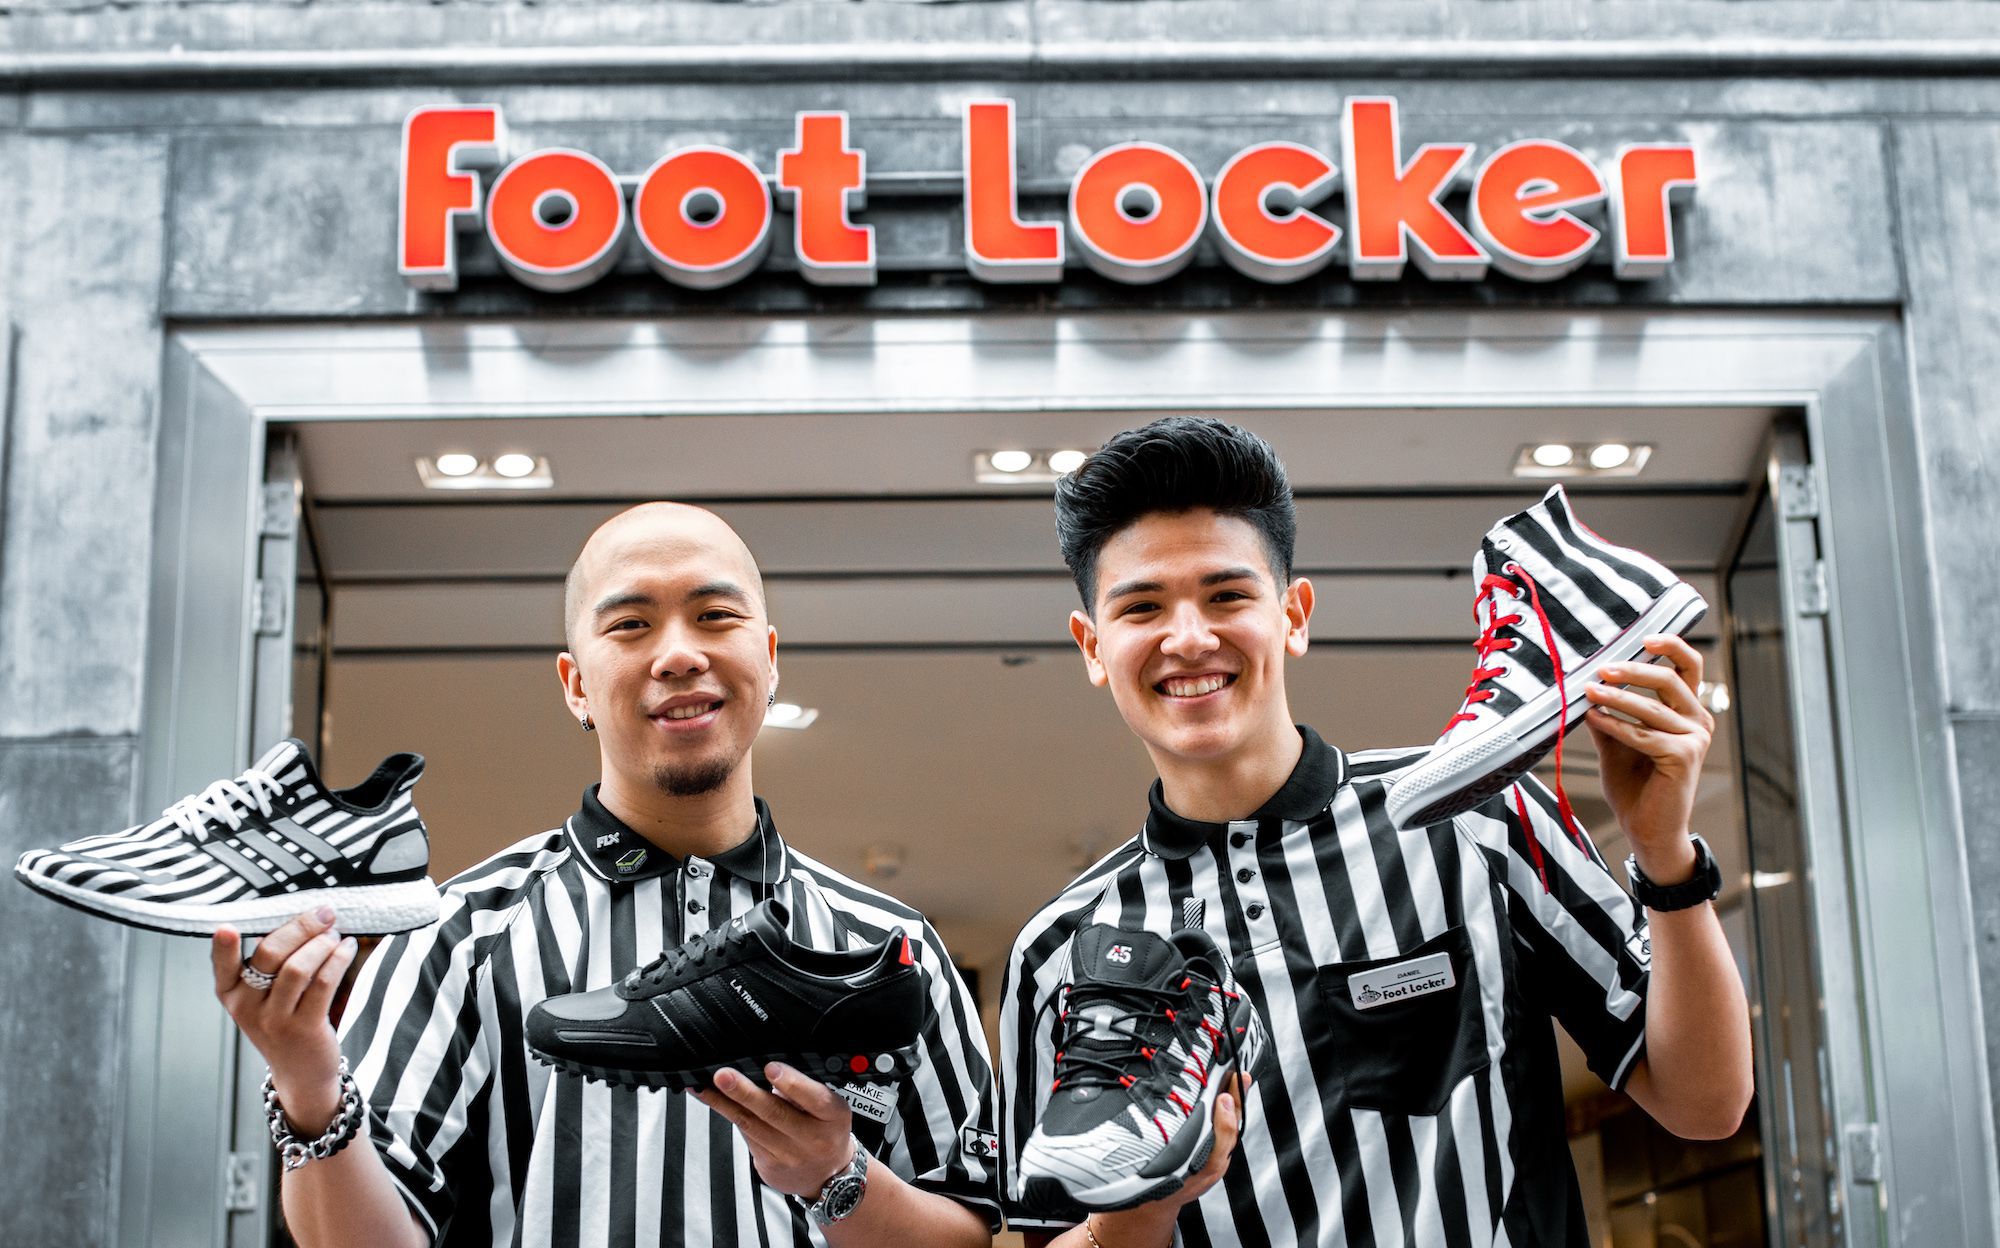 Foot Locker celebrates its 45th anniversary with Europe's sneakerheads